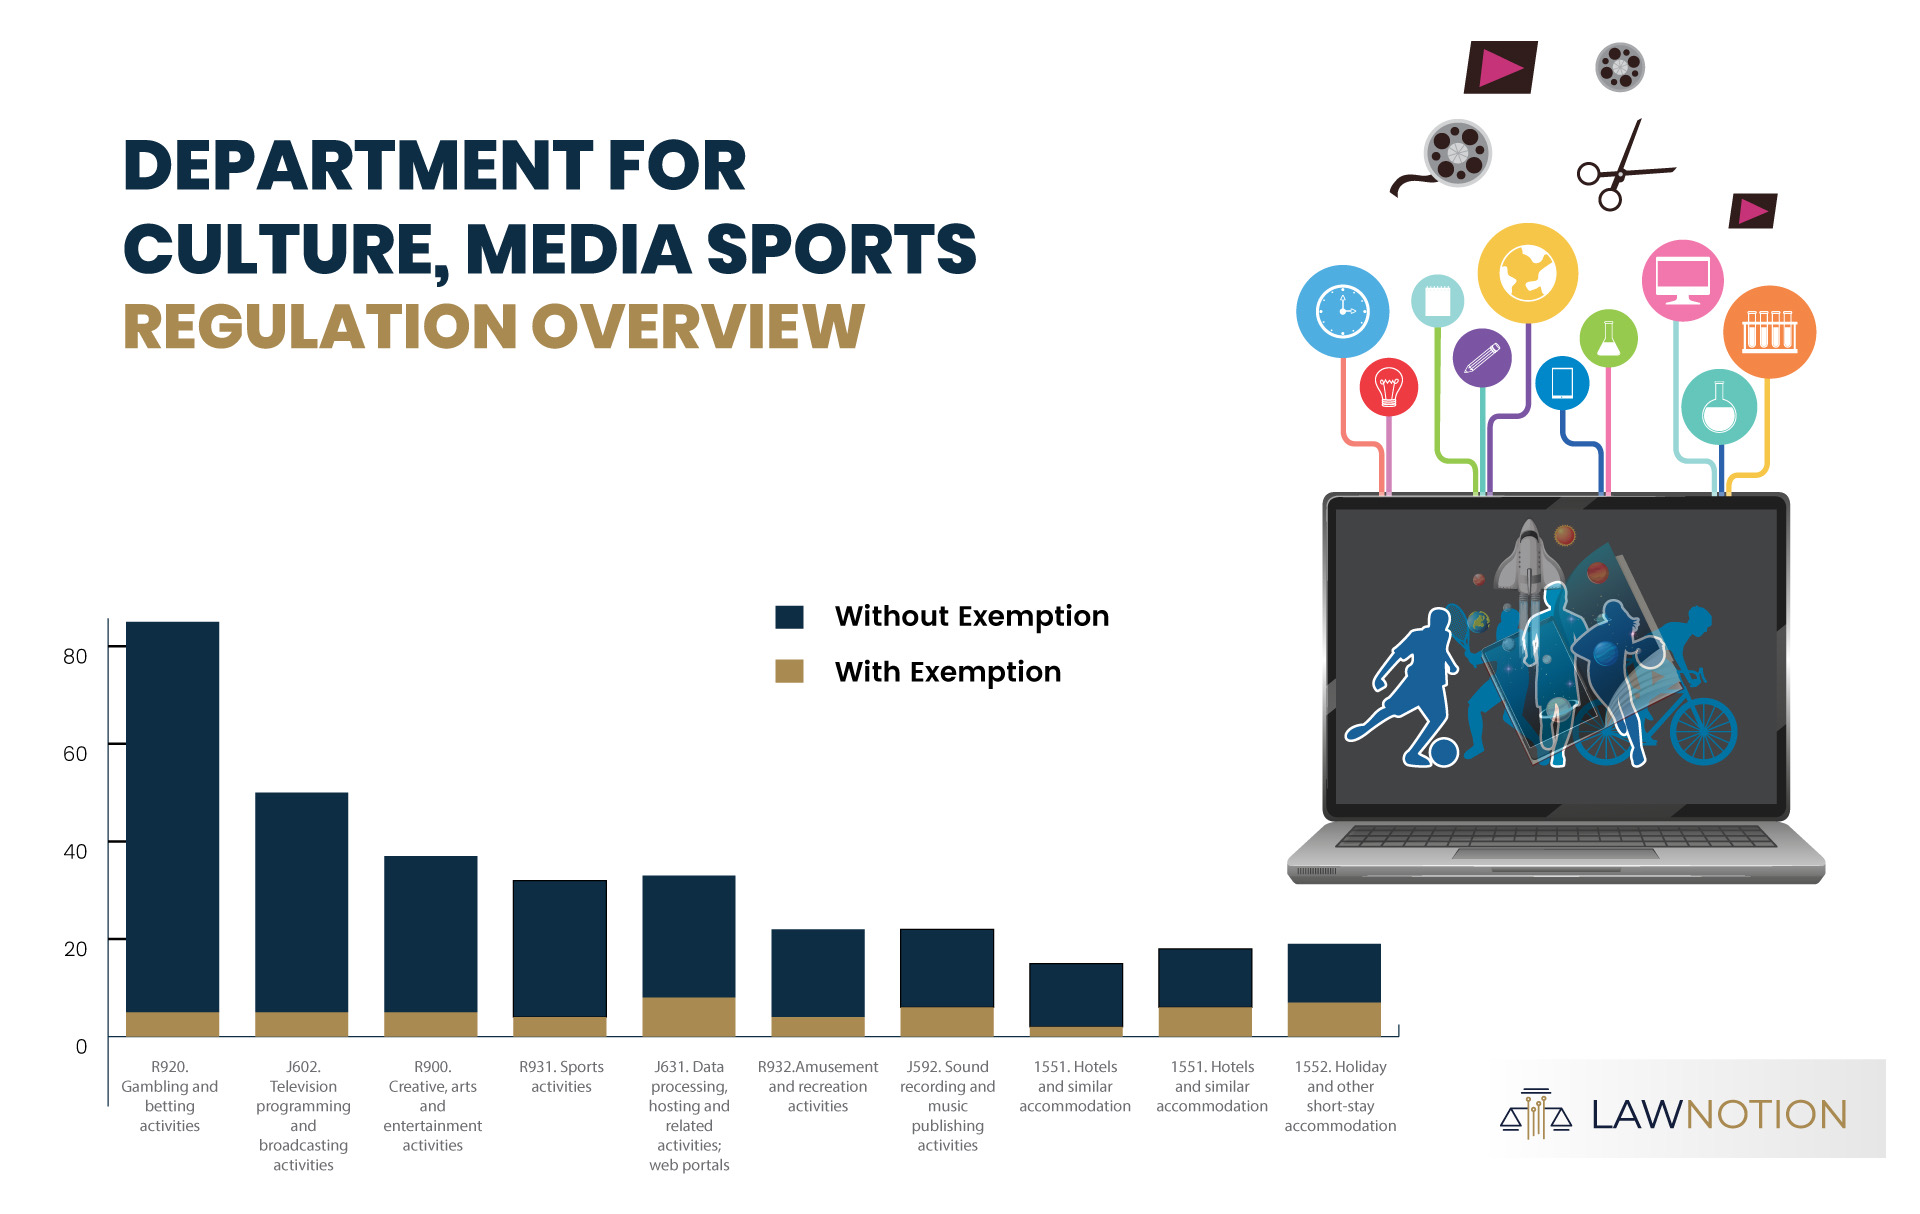 The Department for Culture, Media and Sport (DCMS) Regulation Overview